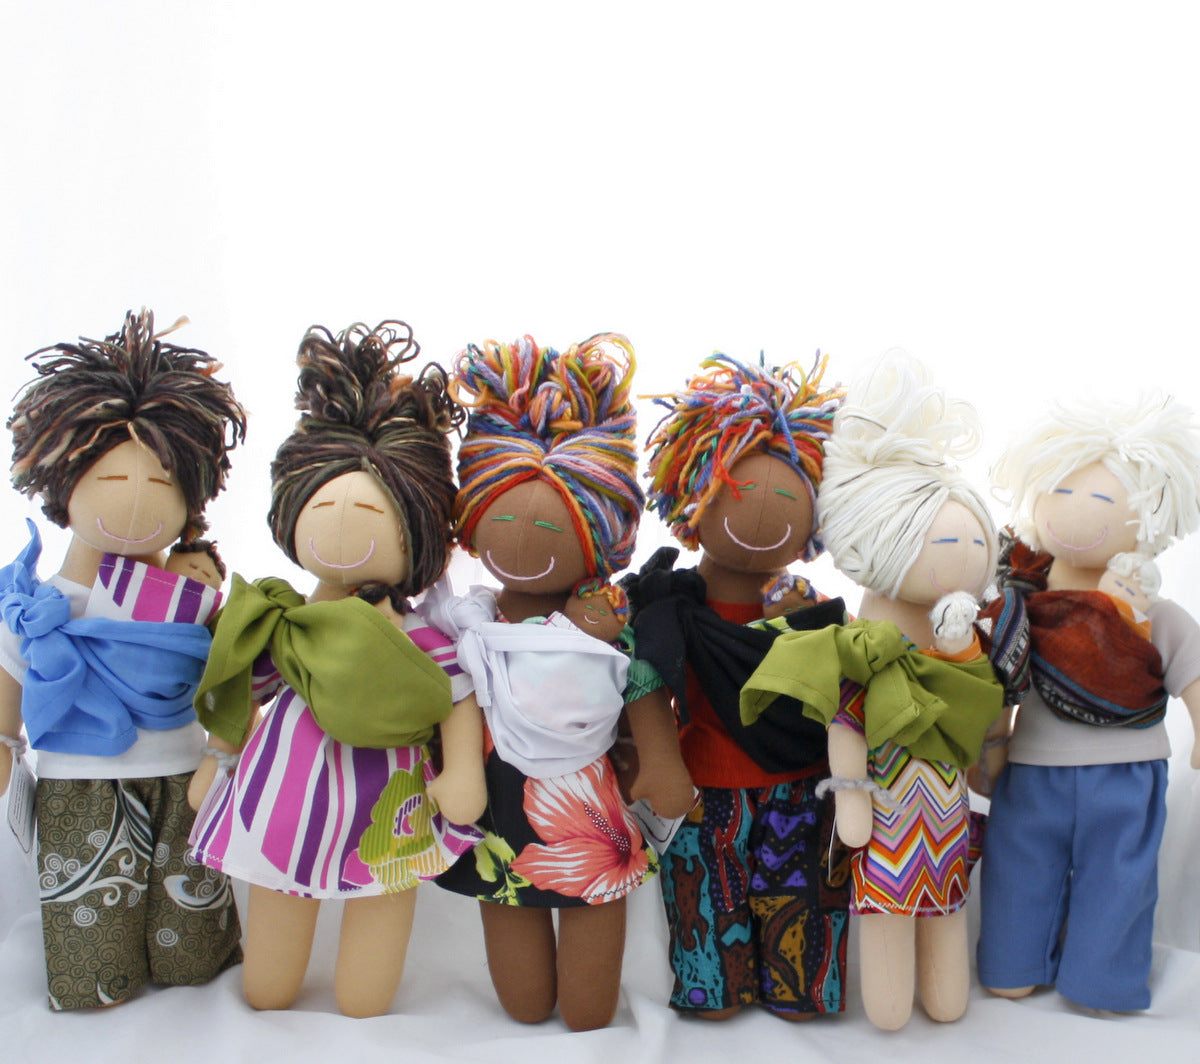 Dolls for all types of families